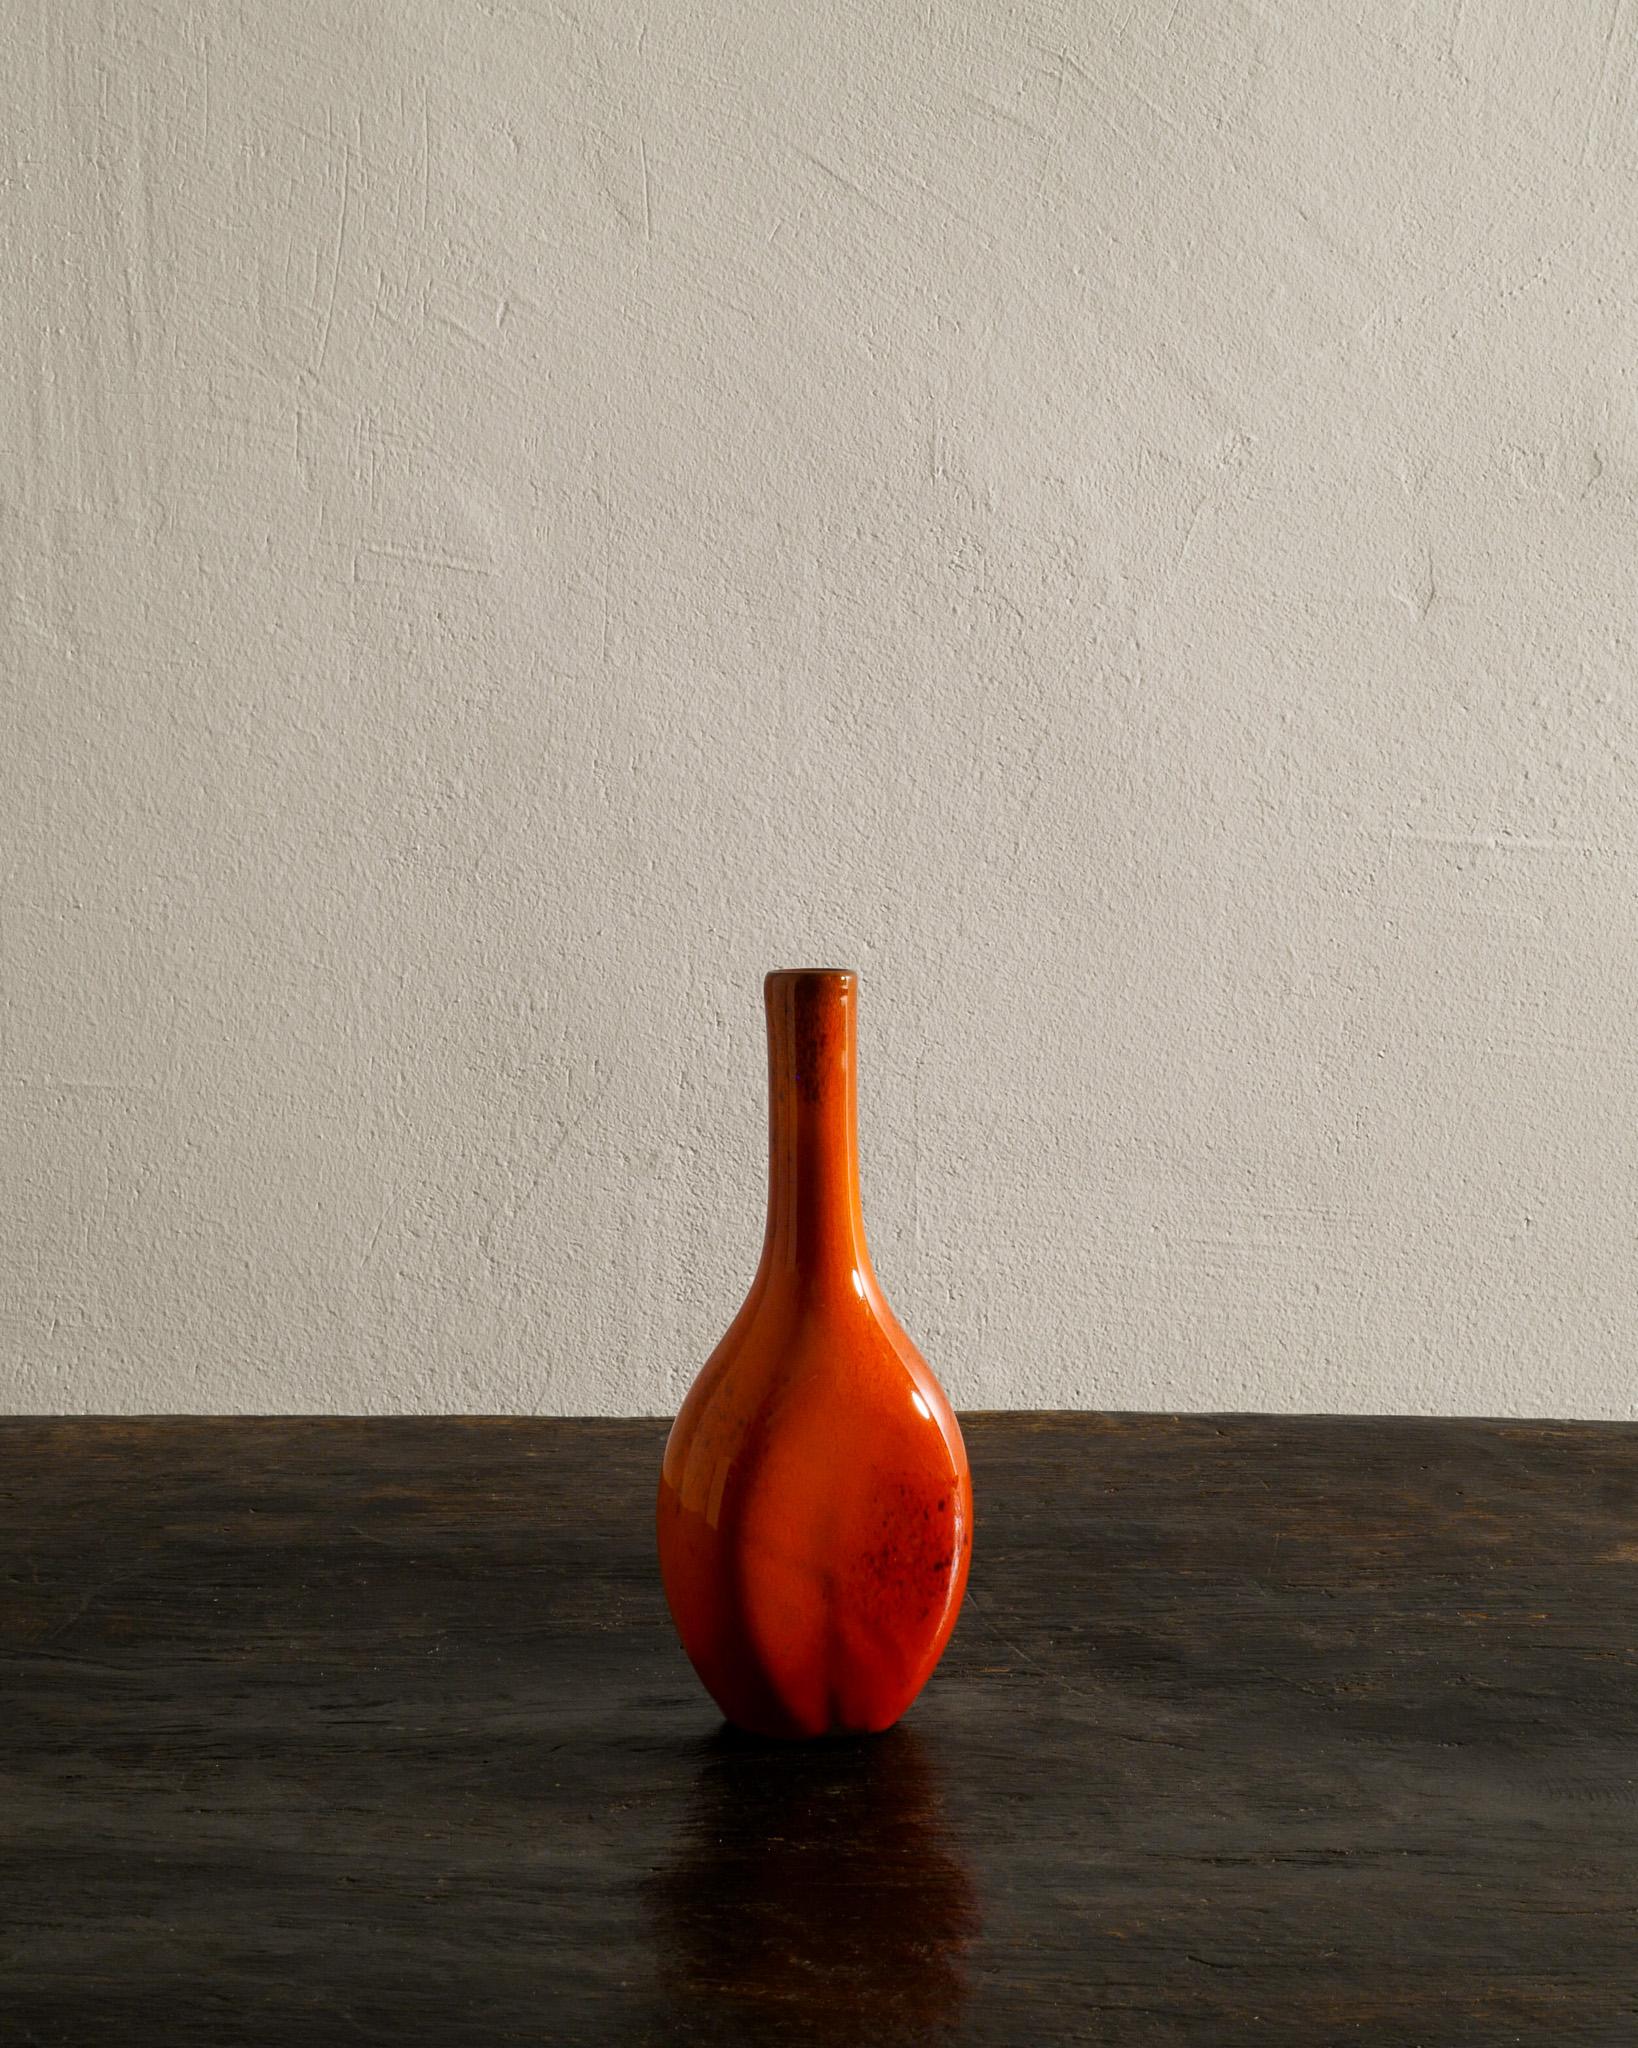 Rare and decorative French mid century red stoneware / ceramic vase in a warm red color and in style of George Jouve produced in the 1950s. In good original condition with small signs from age and use. 

Dimensions: Height: 8.27 in (21 cm) Width: